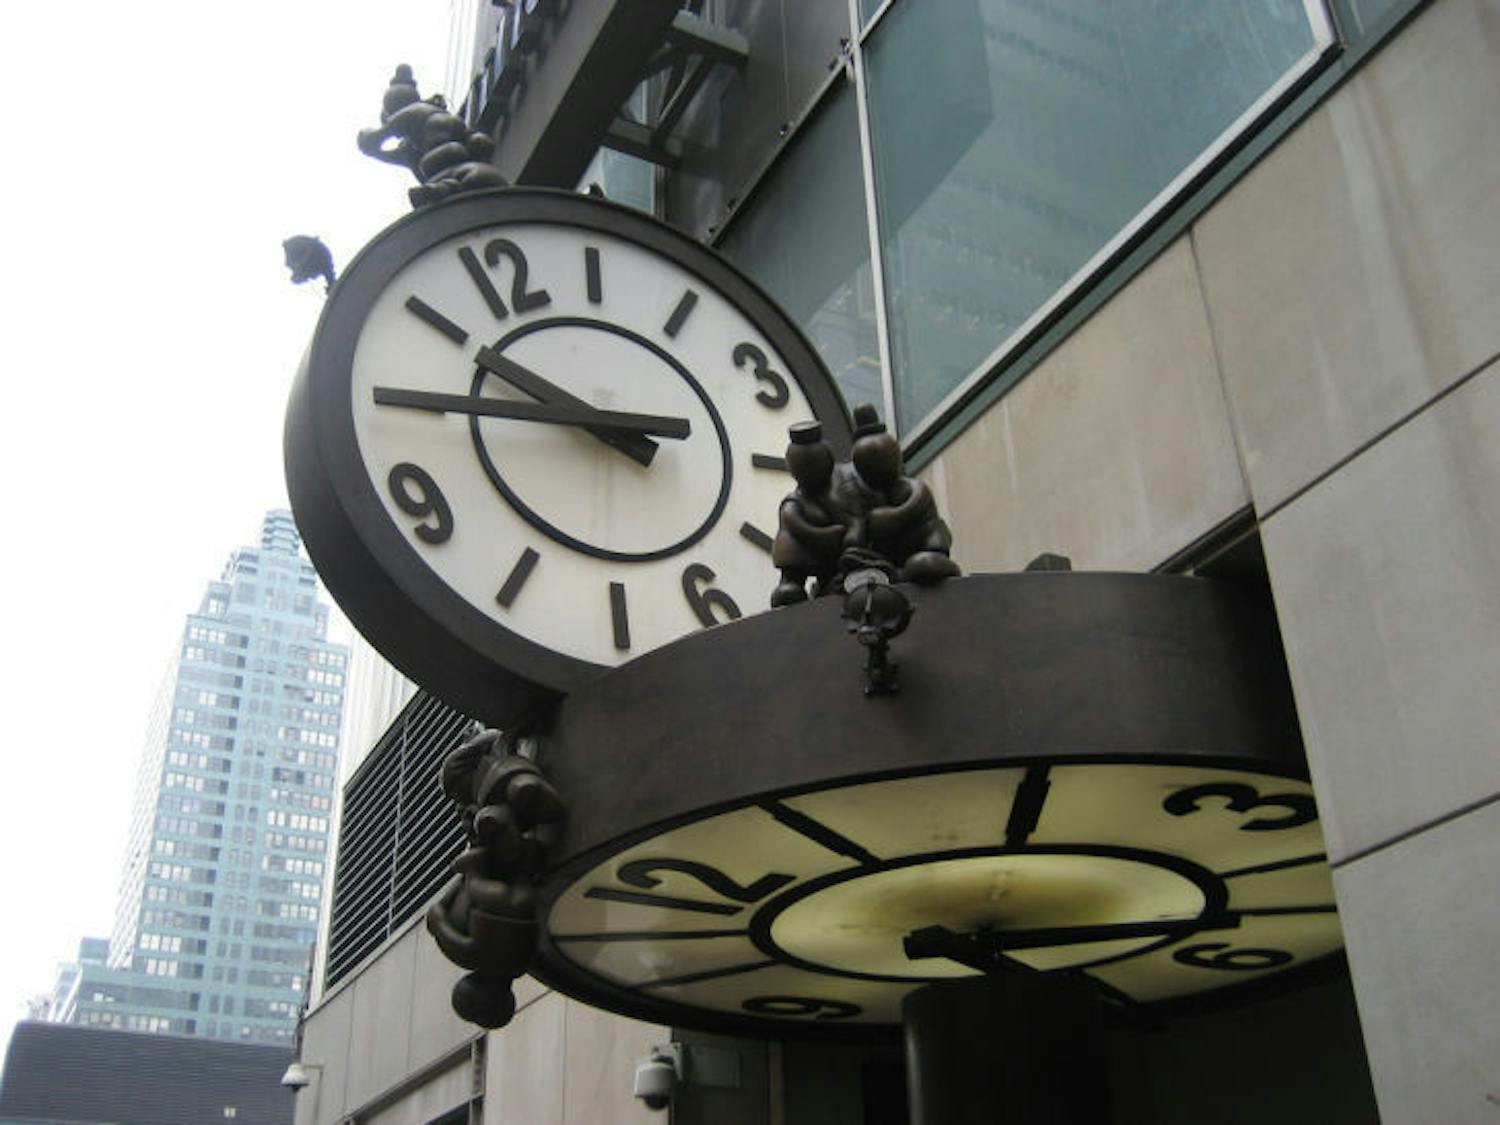 "NYC: Hilton Times Square - 'Time and Money'" by Wally Gobetz, used under CC BY-NC-ND 2.0